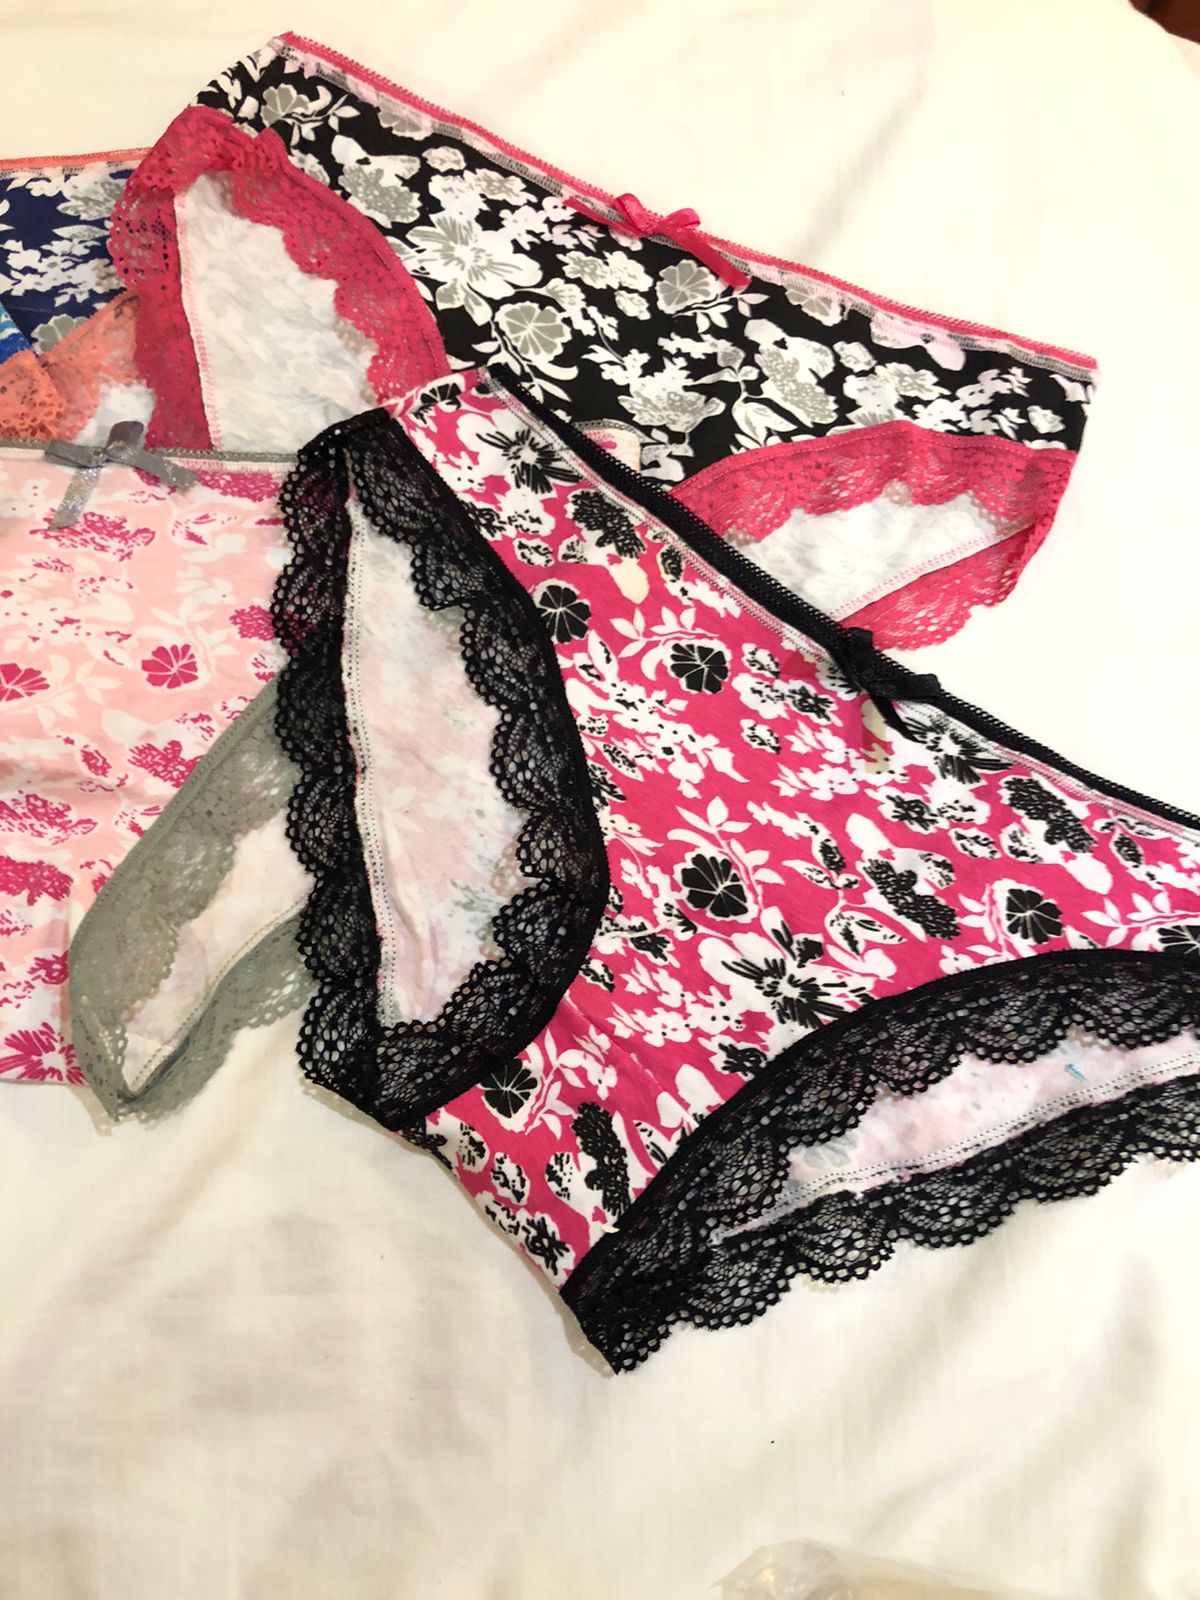 Pack of 5 Printed Soft Cotton Panties